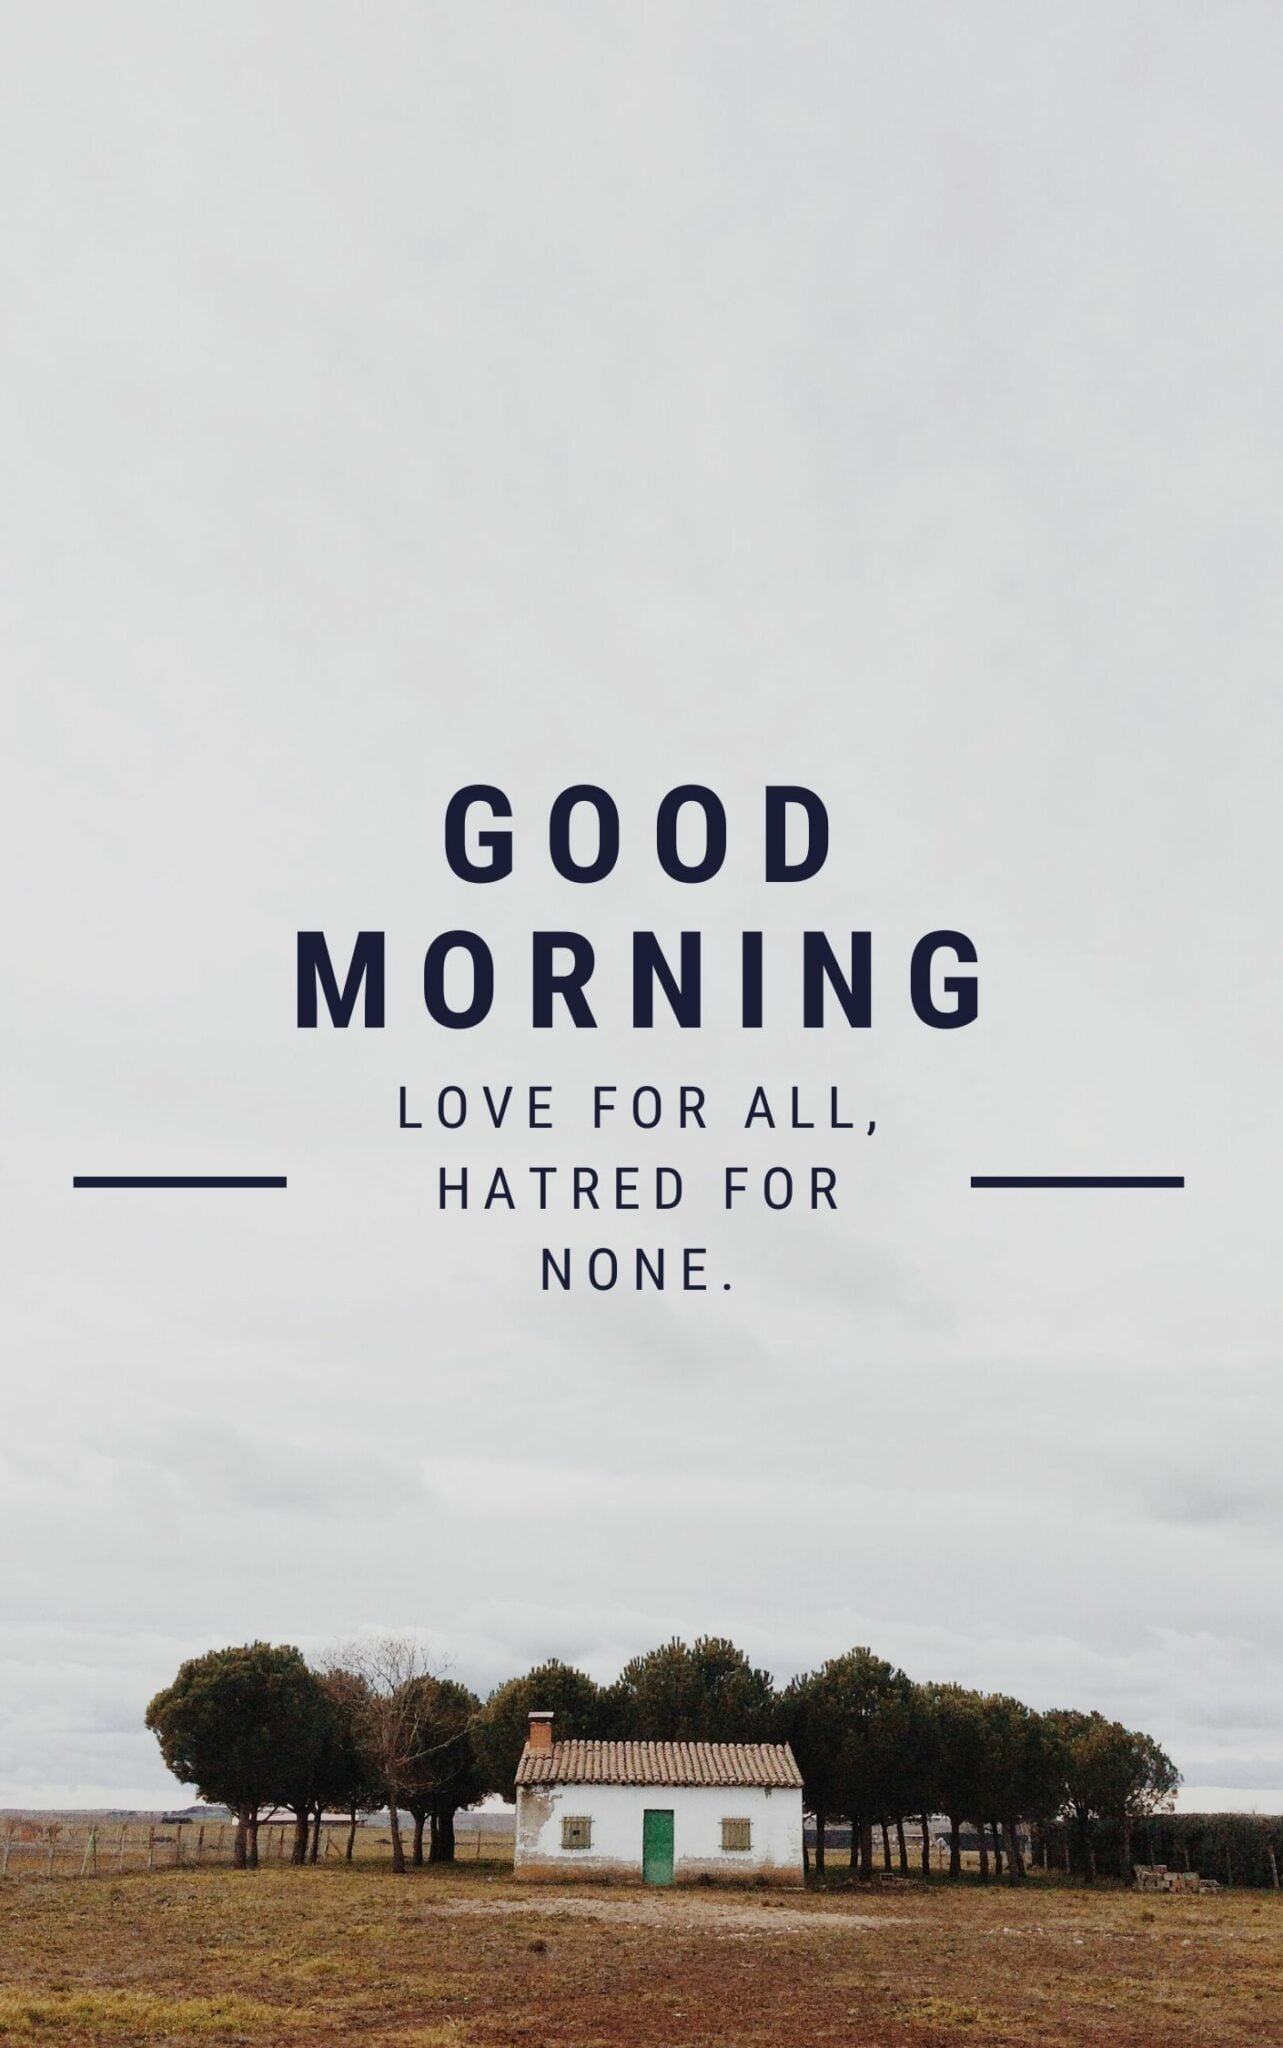 Love for All, Hatred for none Good Morning Image